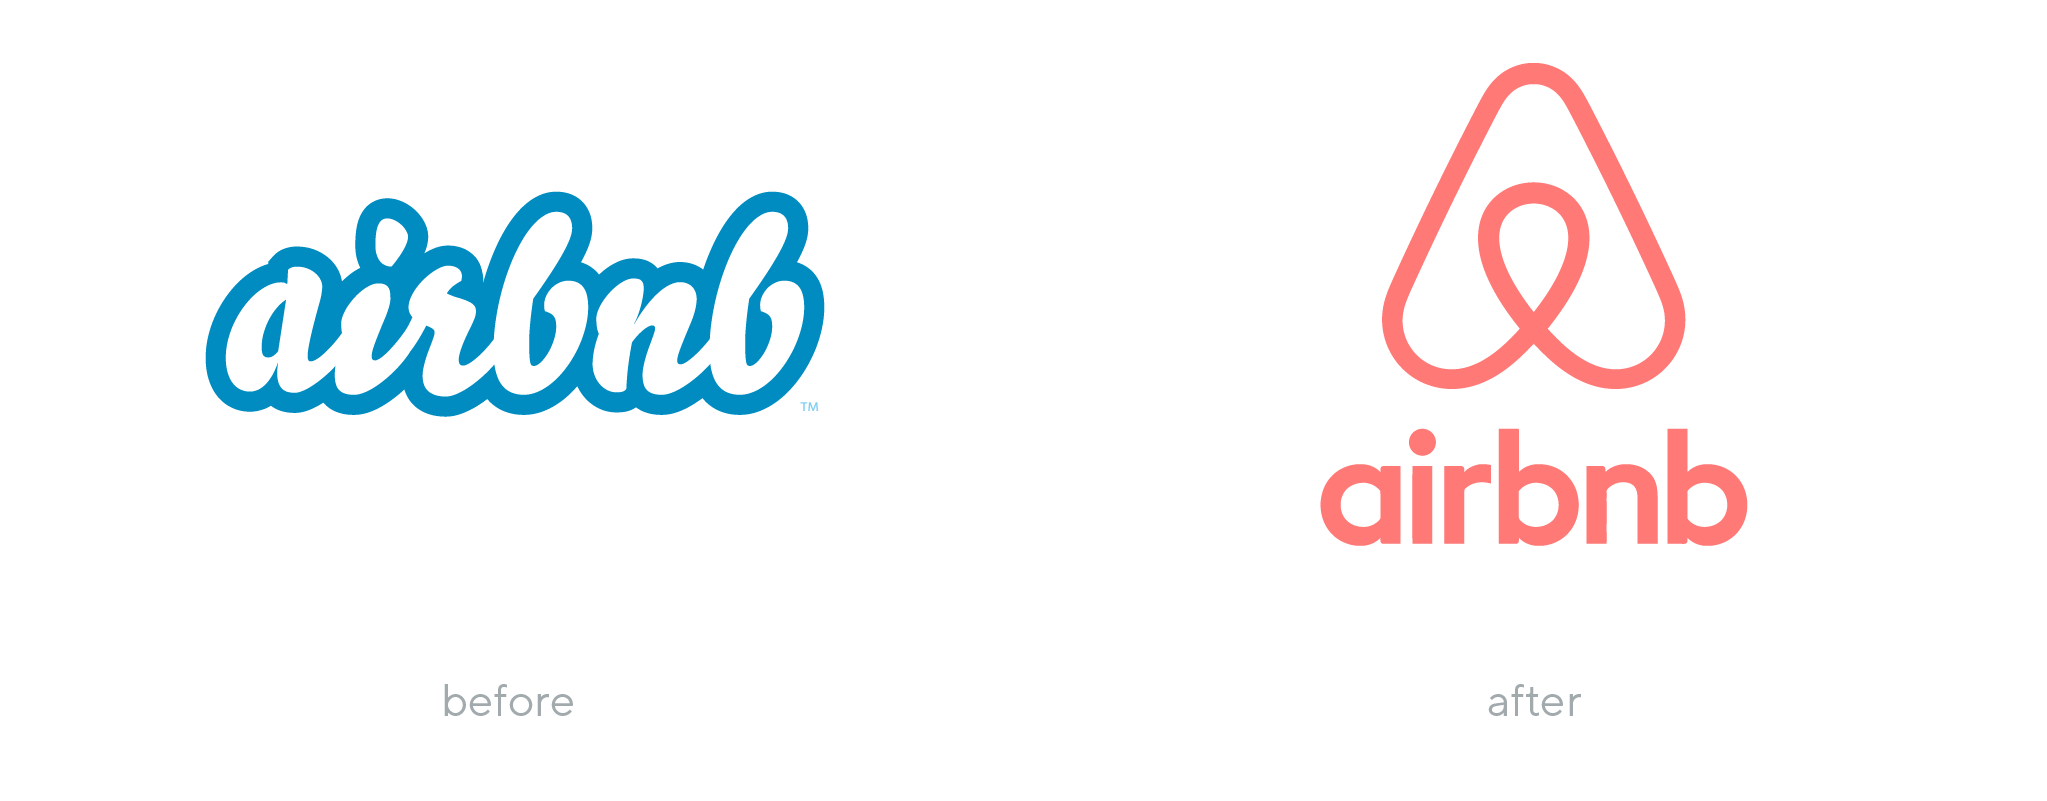 Airbnb logo before and after rebranding